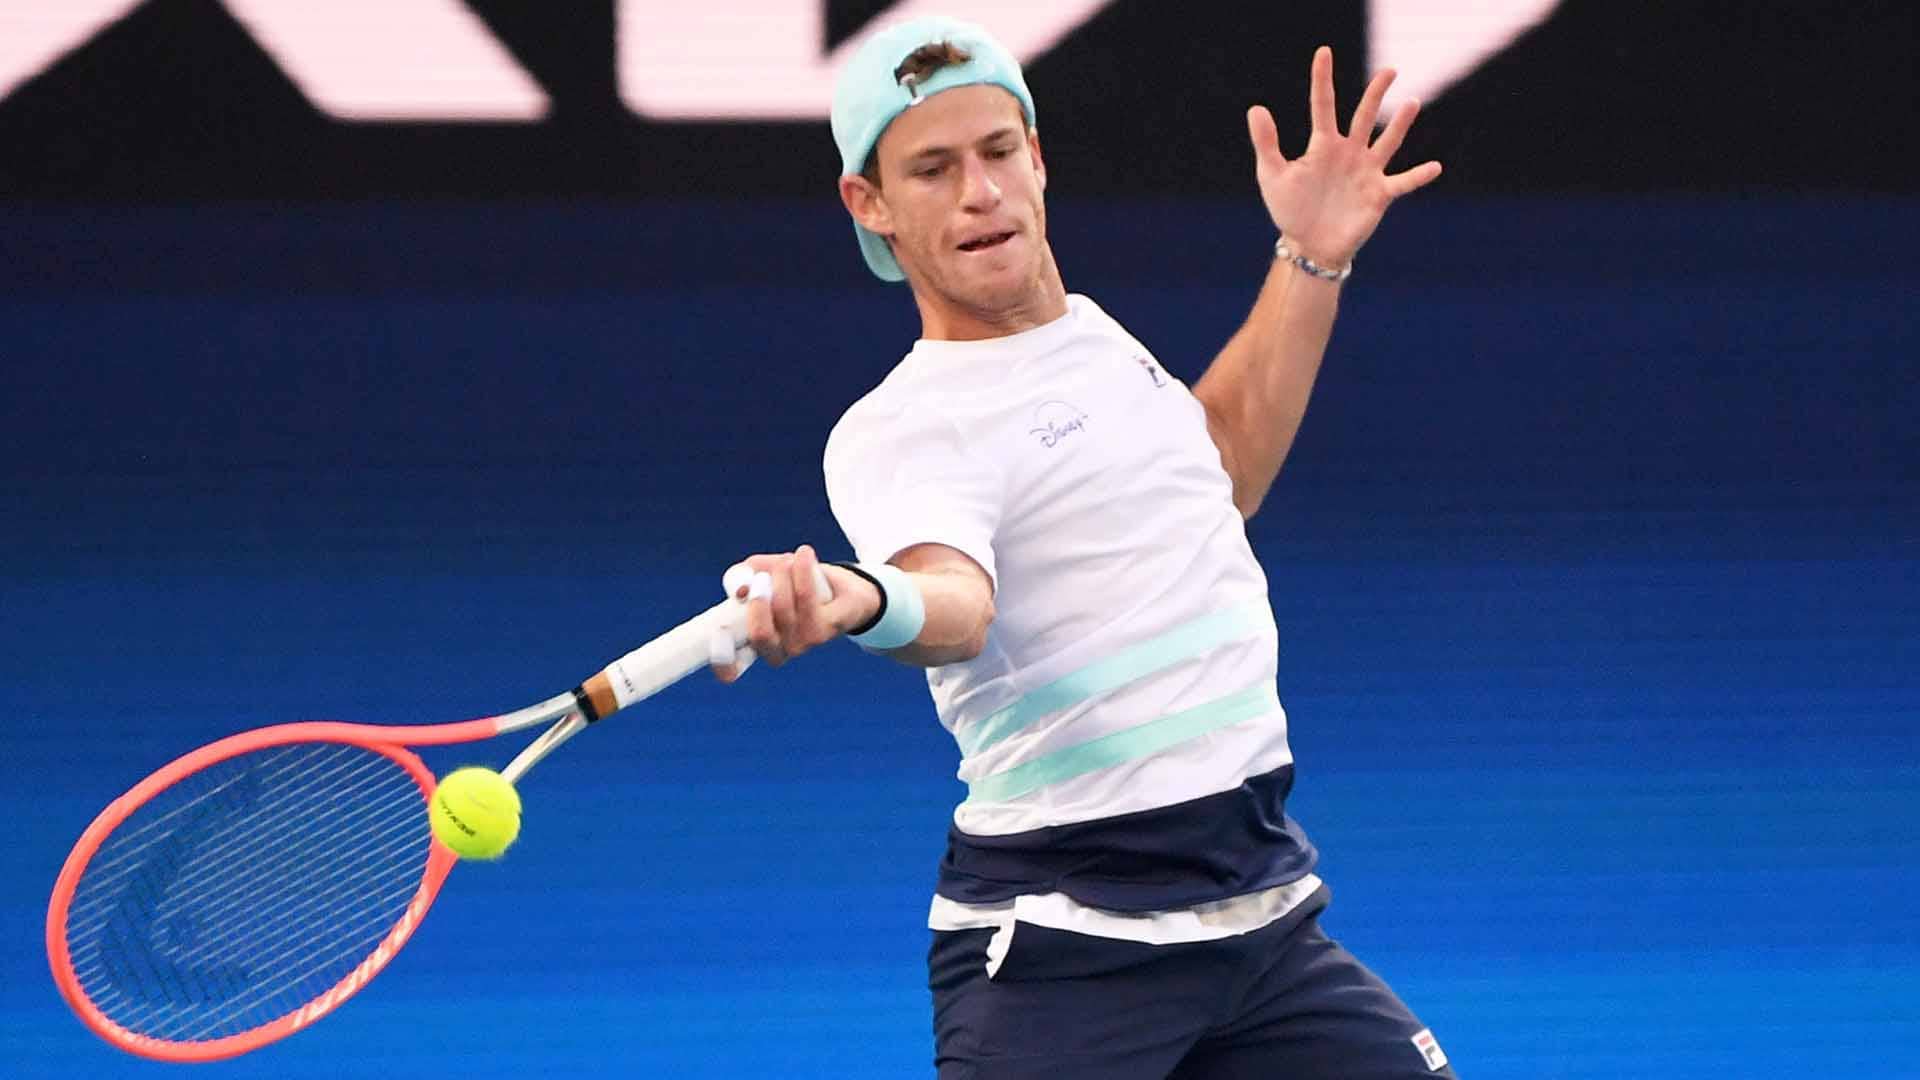 Diego Schwartzman claims his second win in five ATP Head2Head encounters against Kei Nishikori on Saturday at the ATP Cup.